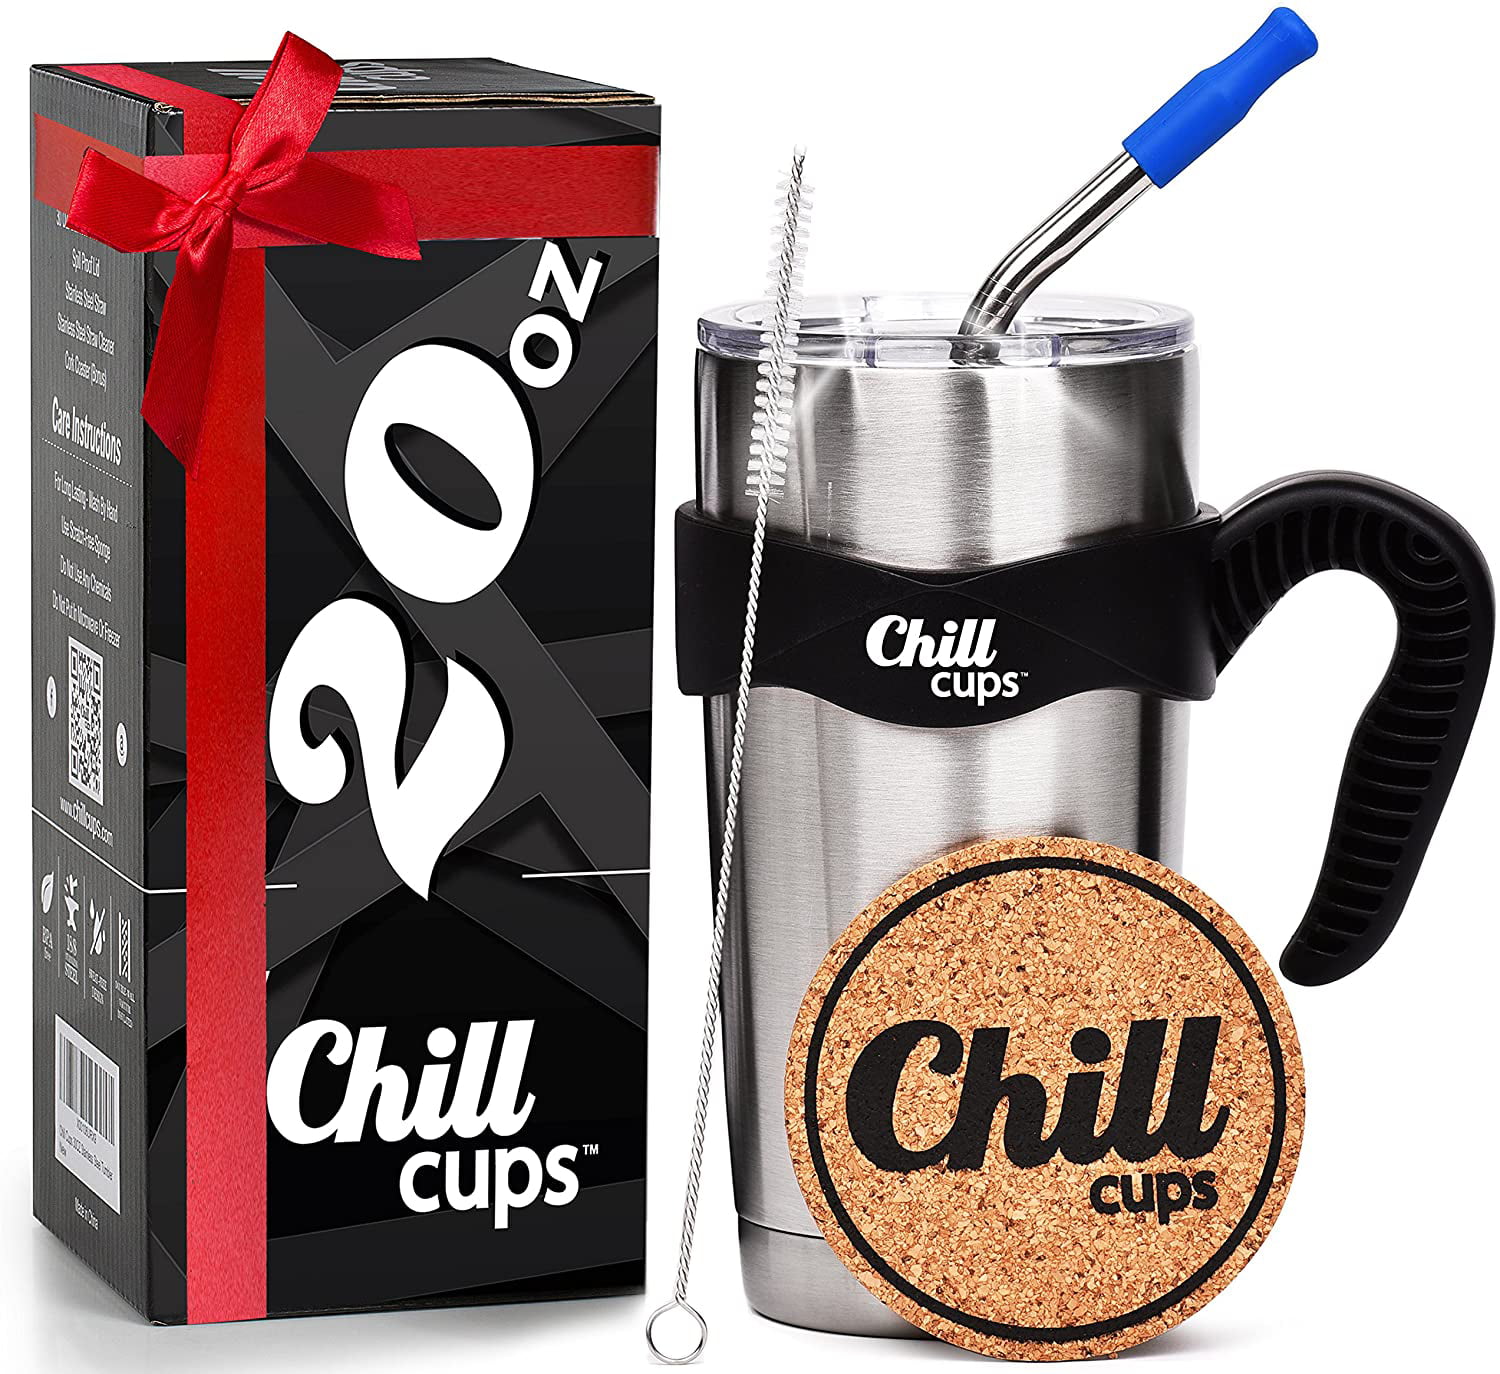 Insulated Travel Coffee Thermal Mug Silicone Tip Free Bonus Coaster by Chill Cups 20 oz Double Wall Vacuum Drinking Stainless Steel Tumbler Cup with Spill Proof Lid Handle and 8mm Straw 